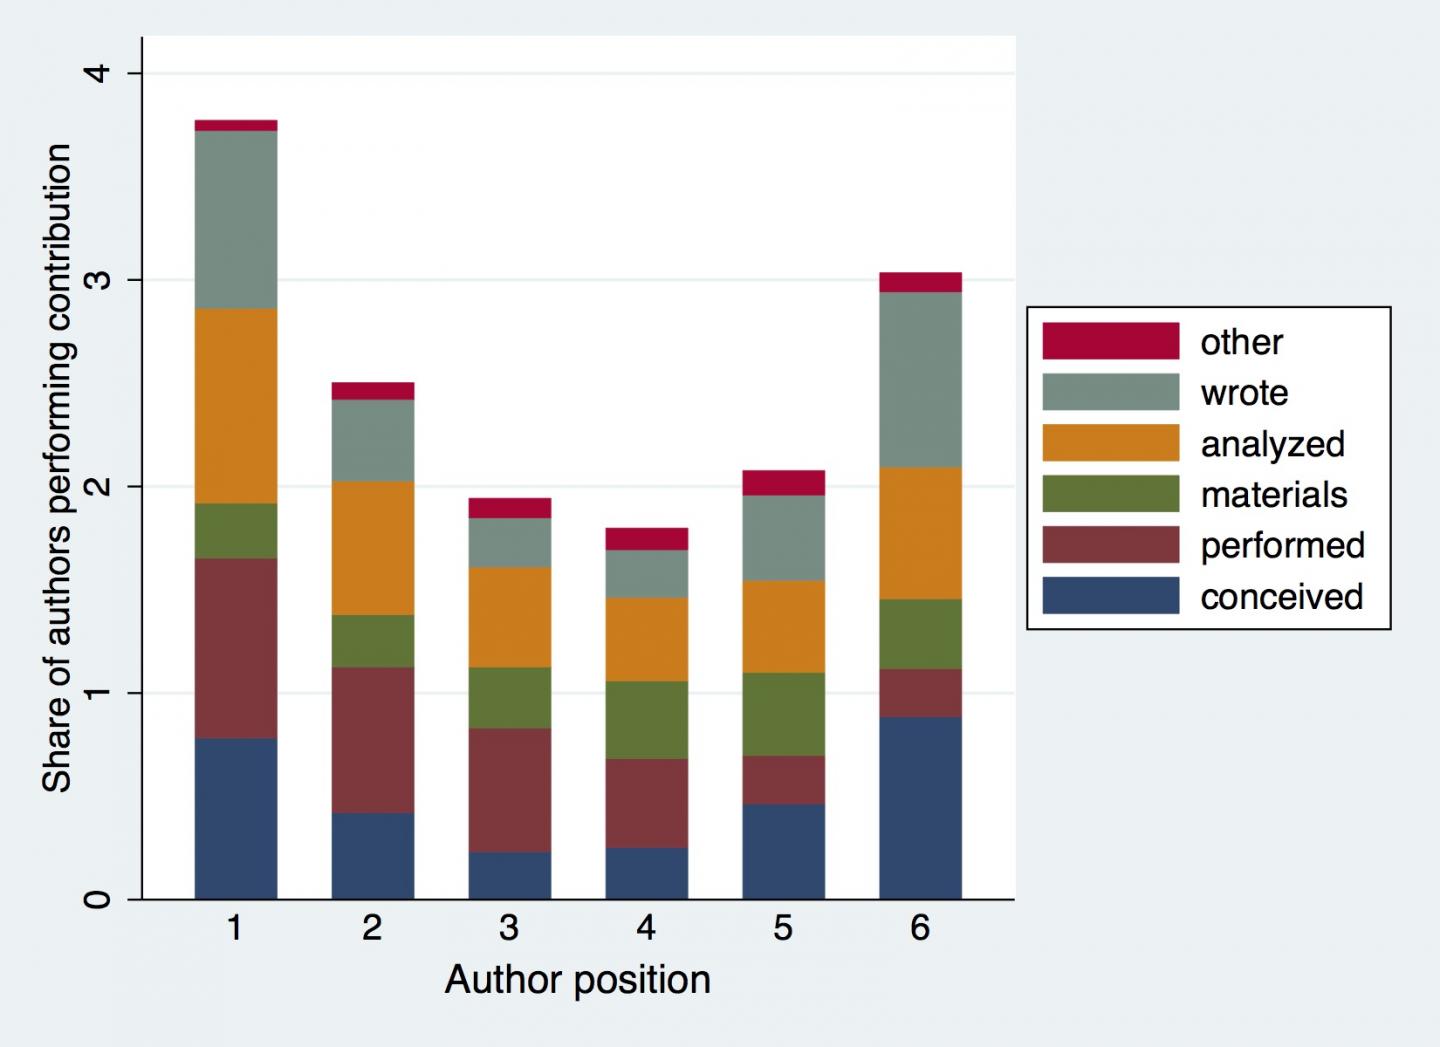 Share of Work and Author Position